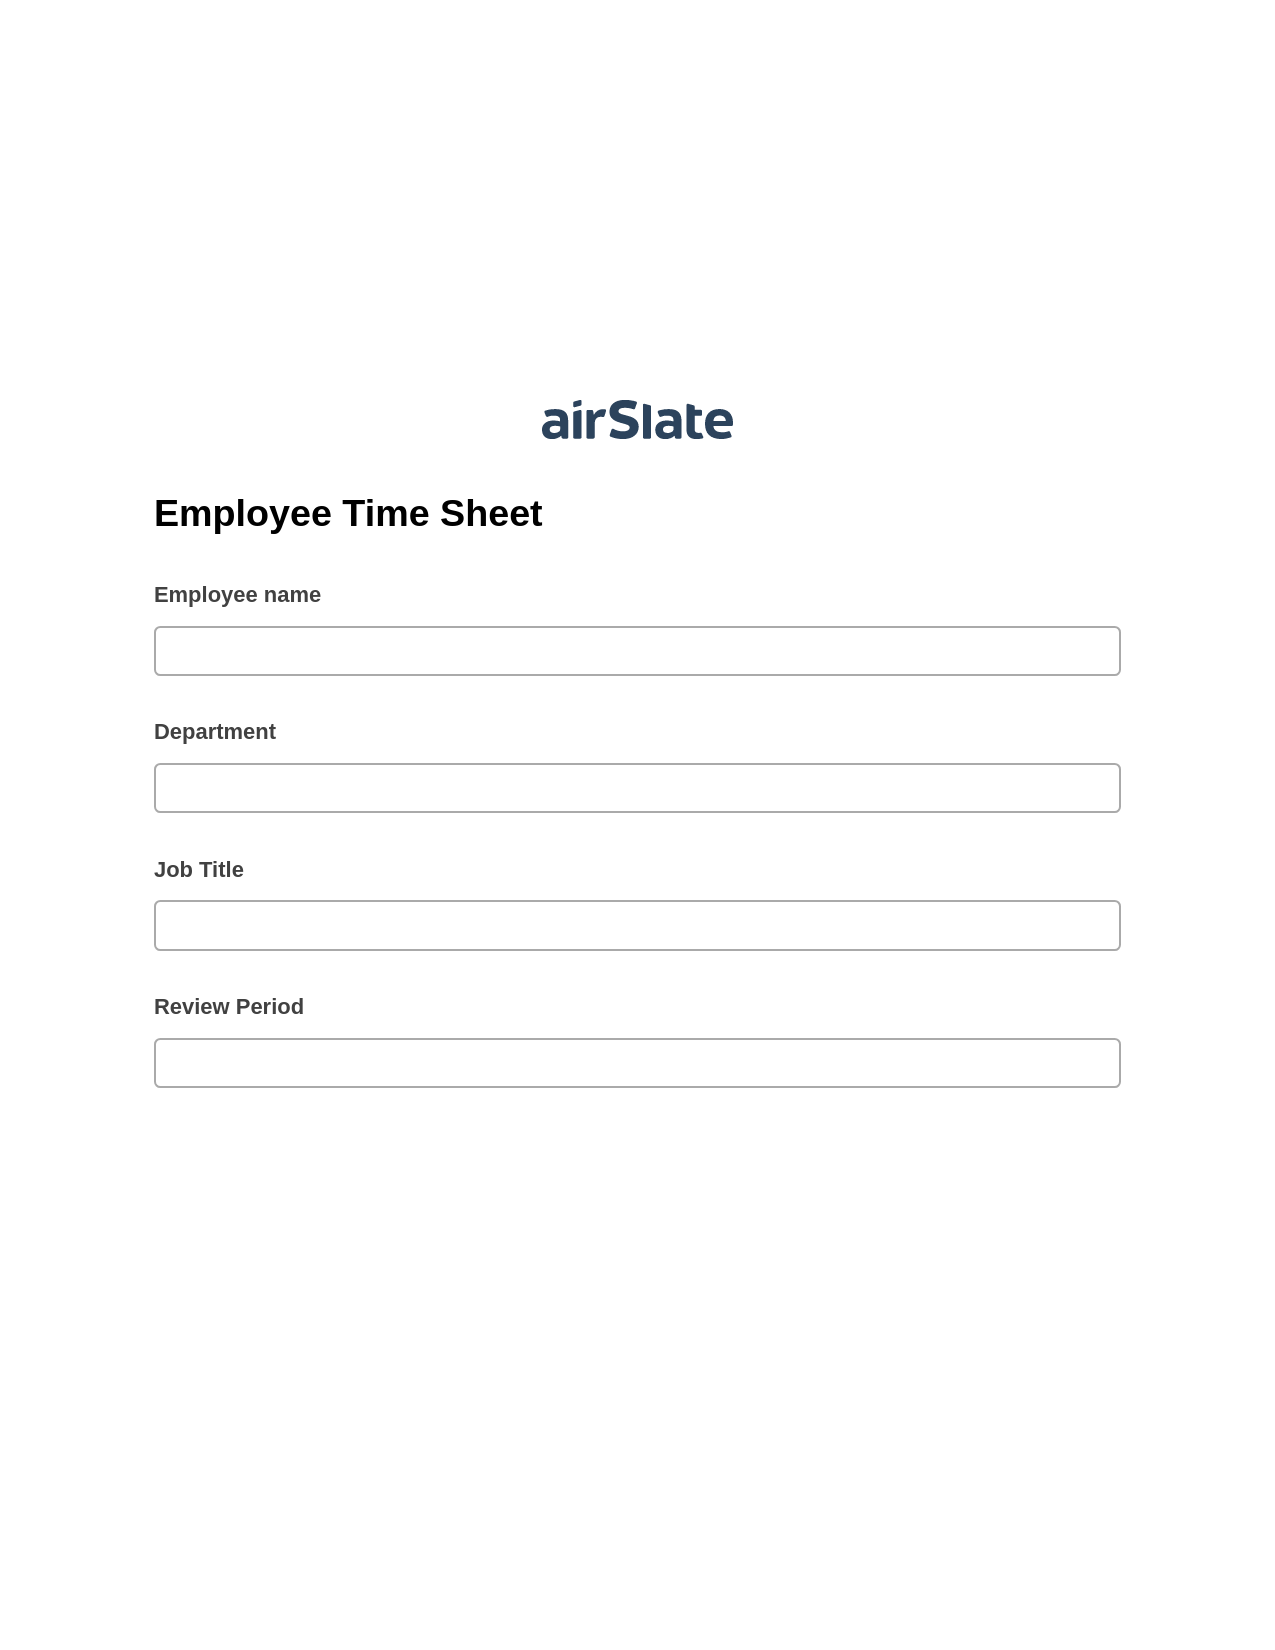 Employee Time Sheet Pre-fill from CSV File Bot, Custom Field's Value Bot, Email Notification Postfinish Bot